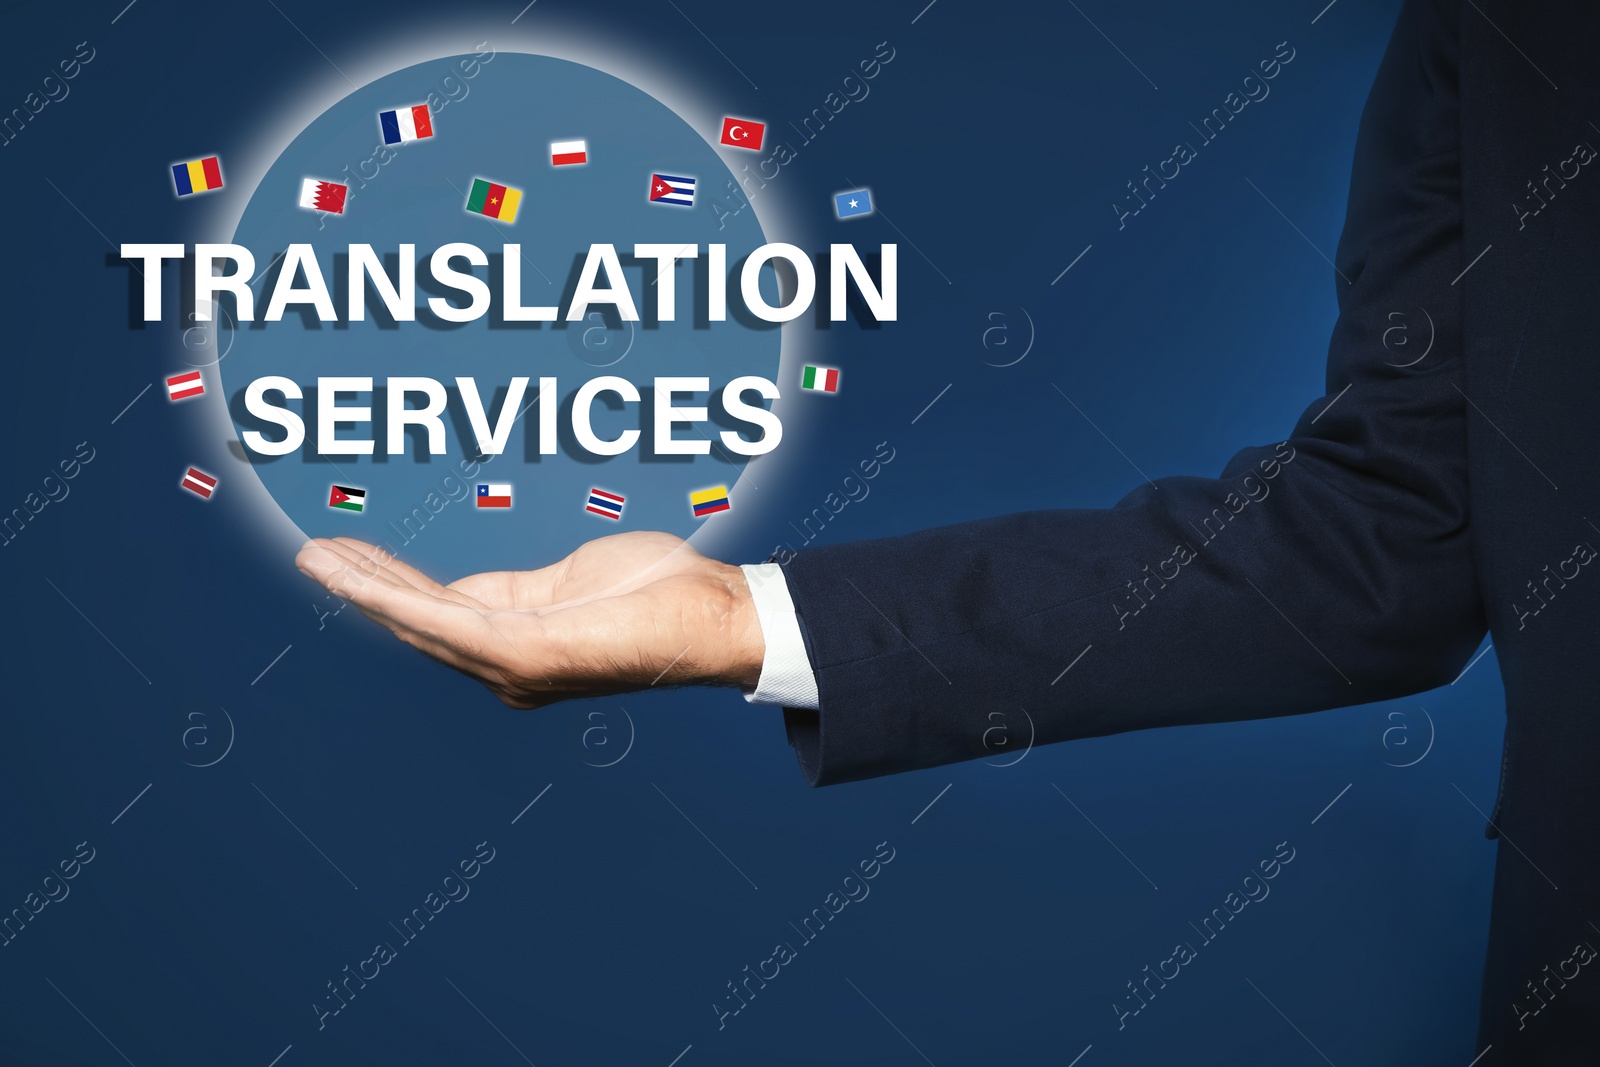 Image of Translation Services. Man demonstration virtual icon with text and flags on blue background, closeup